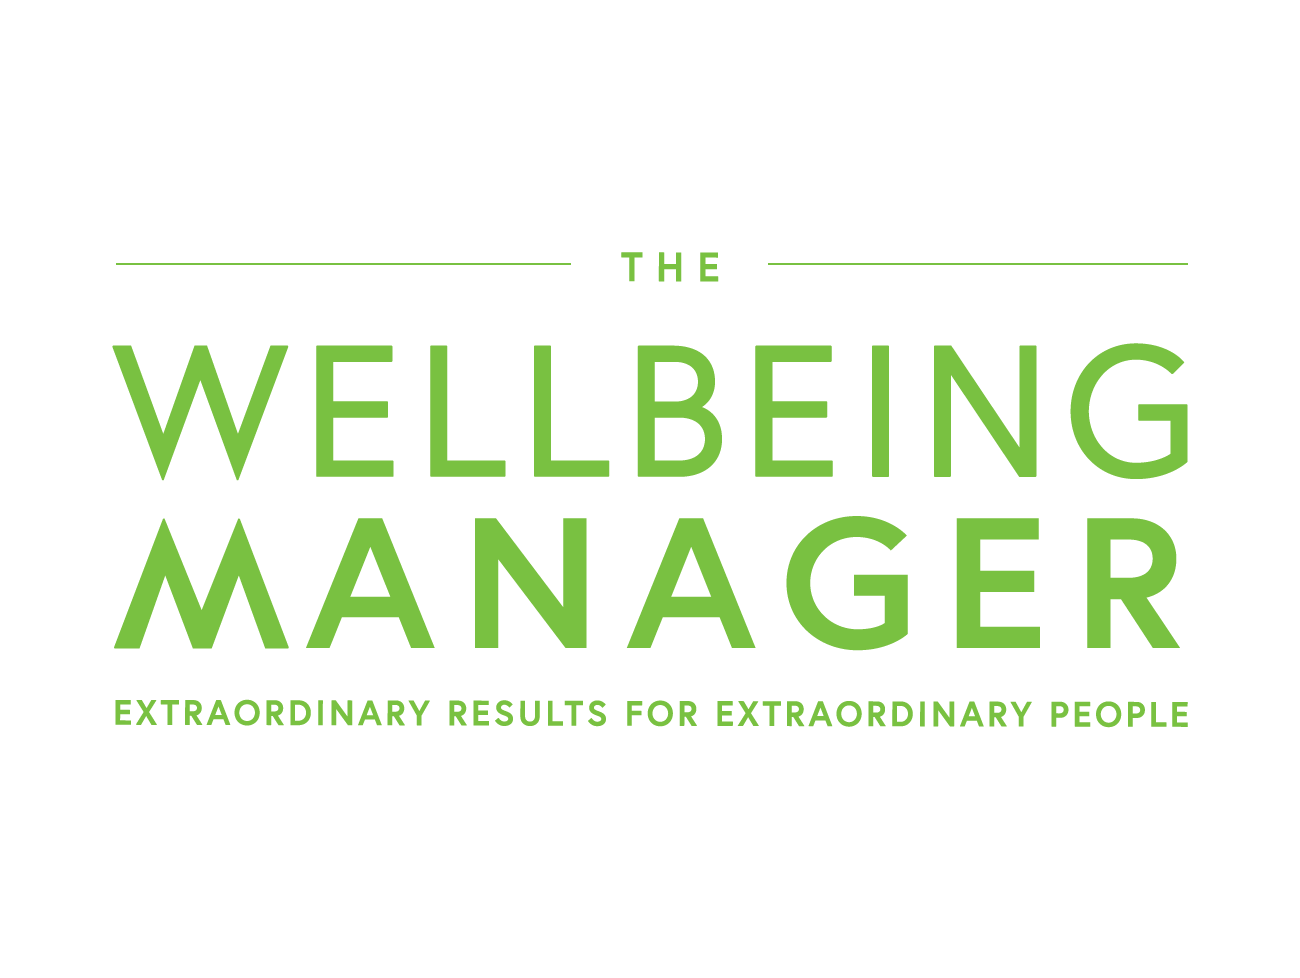 The Wellbeing Manager